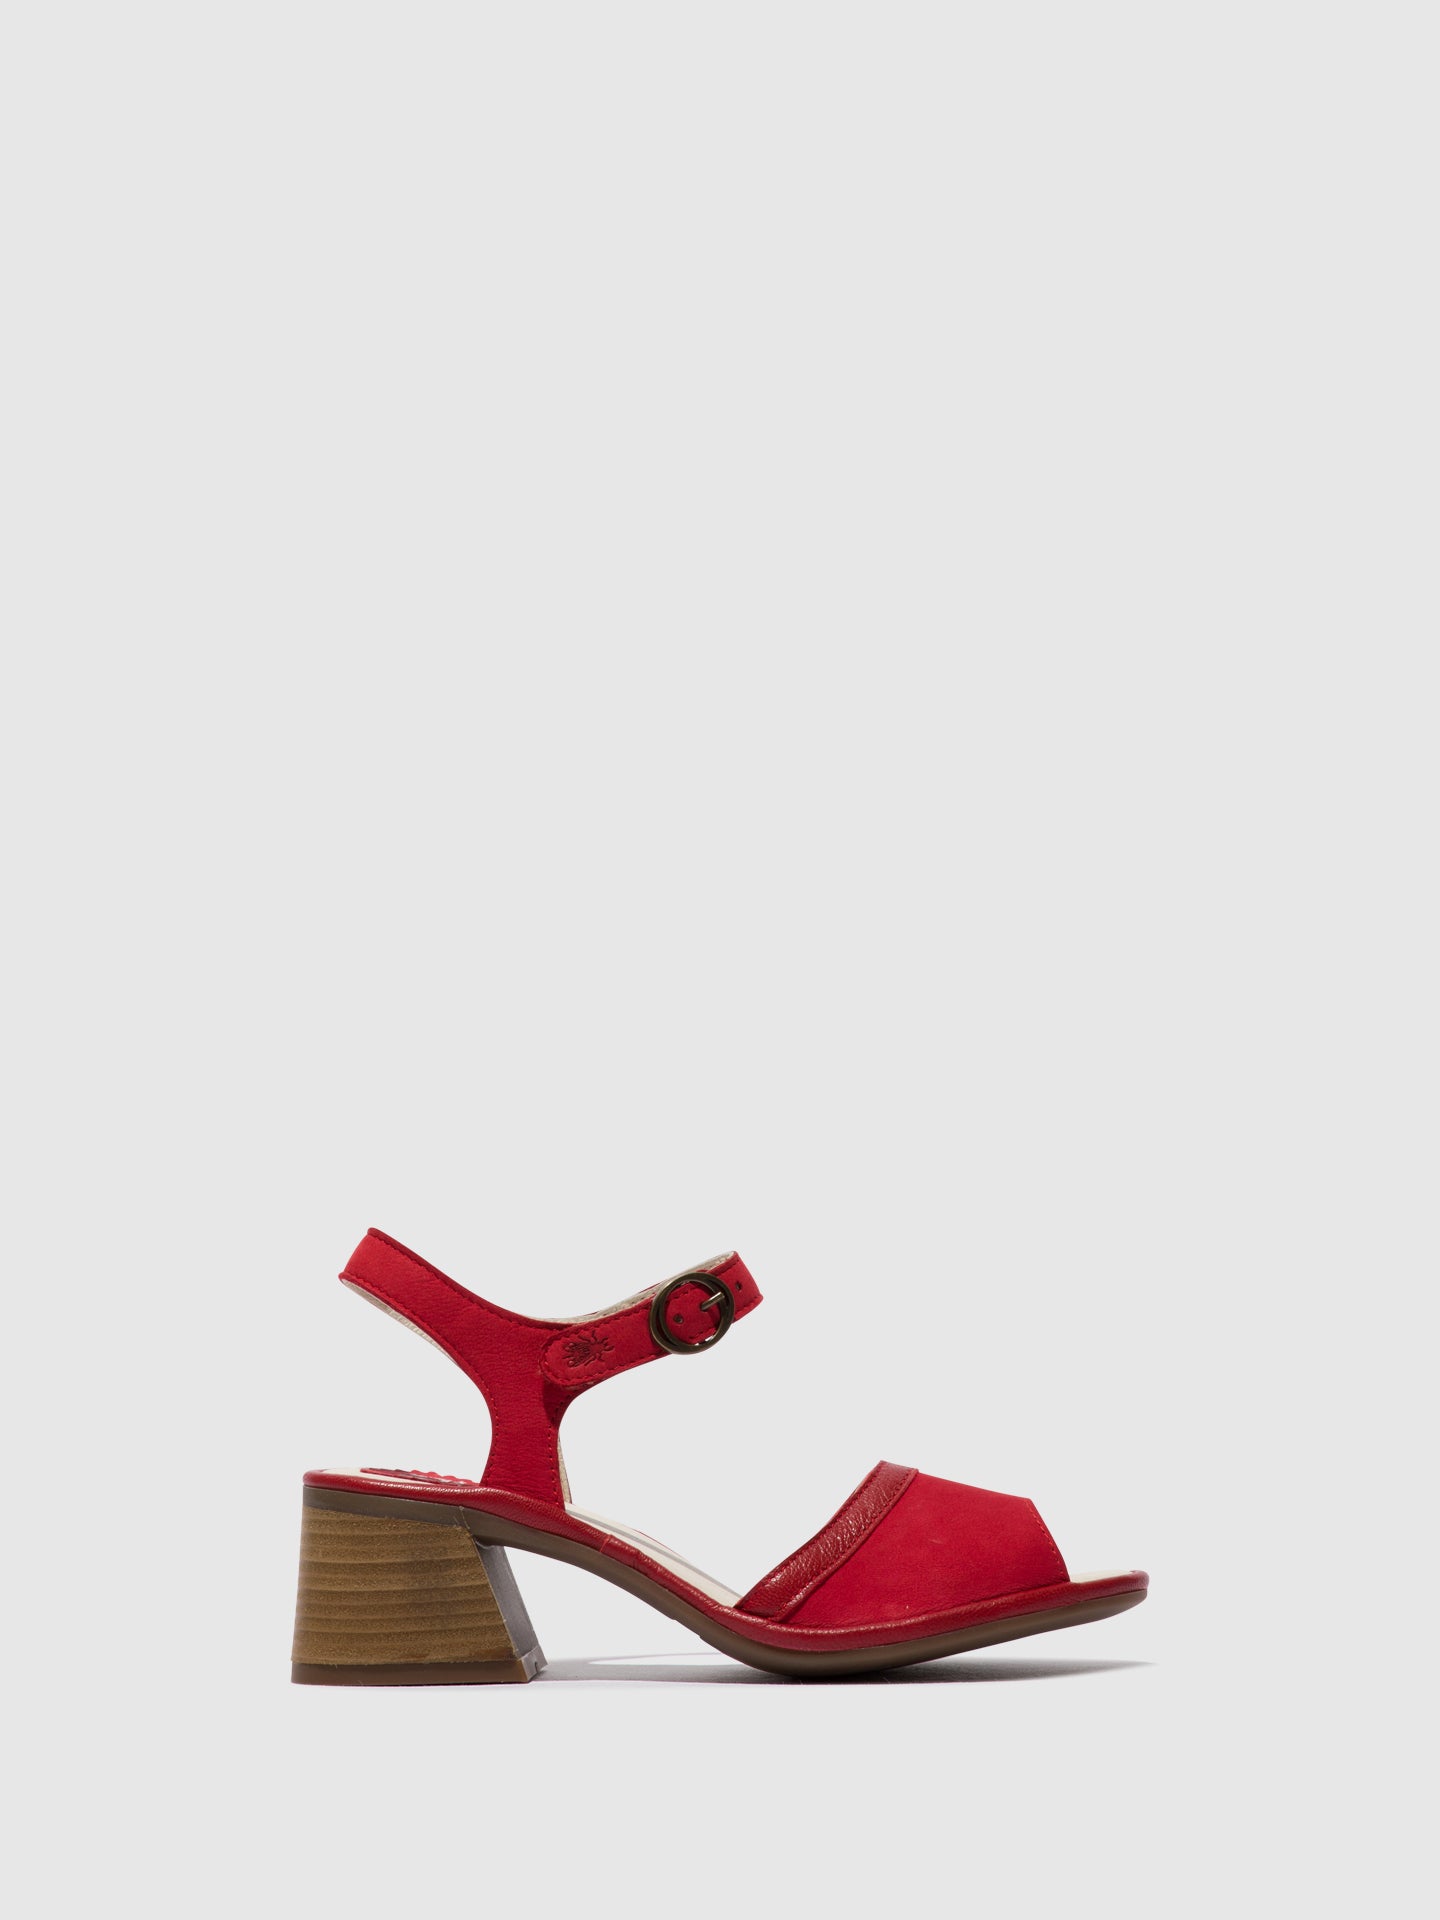 Fly London Ankle Strap Sandals LEAR374FLY LIPSTICK RED